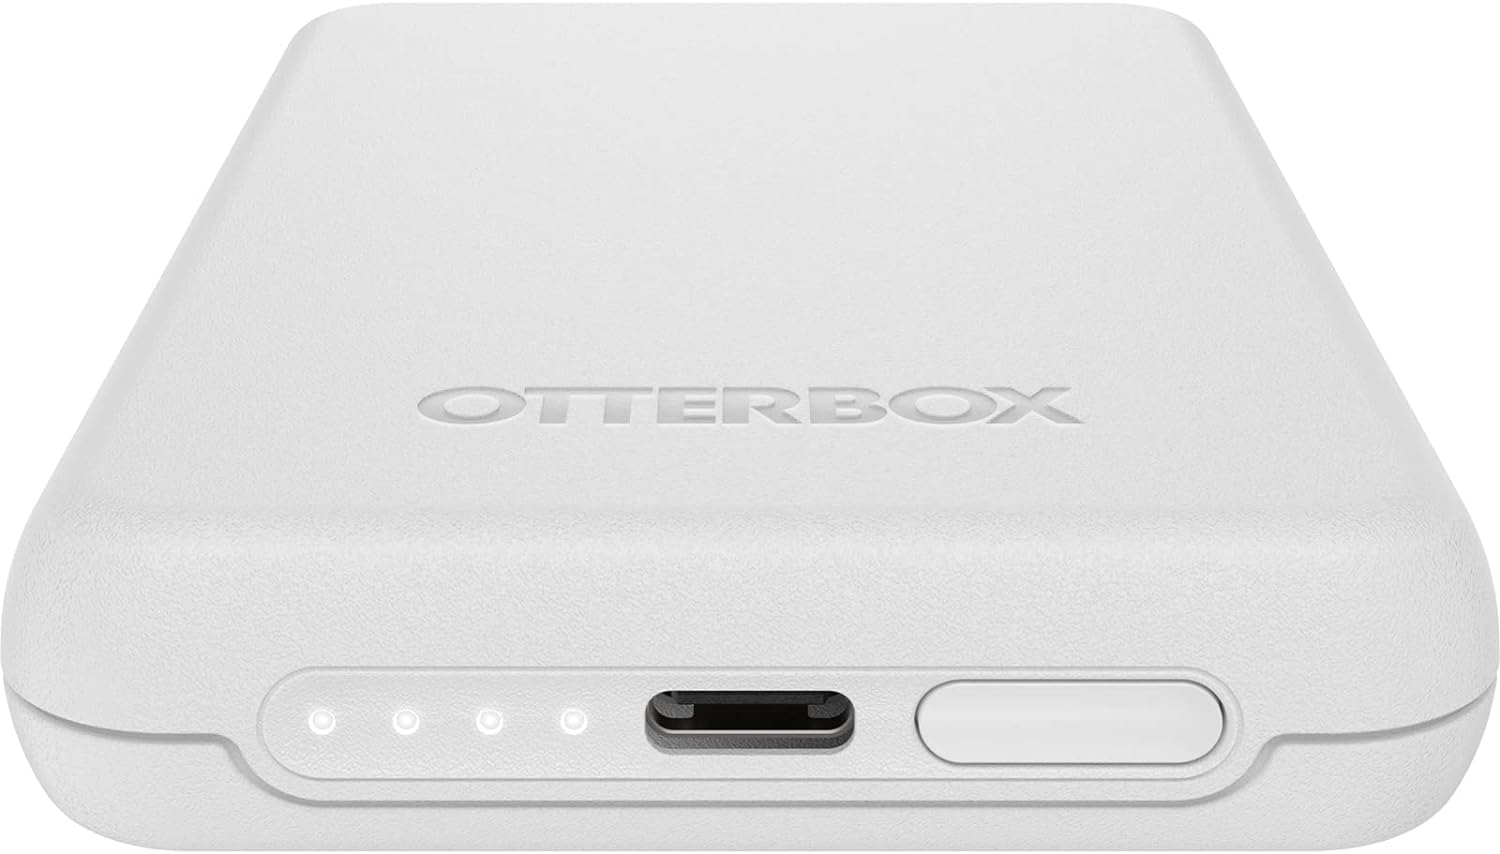 OtterBox 3k mAh Wireless Power Bank for MagSafe - White (New)